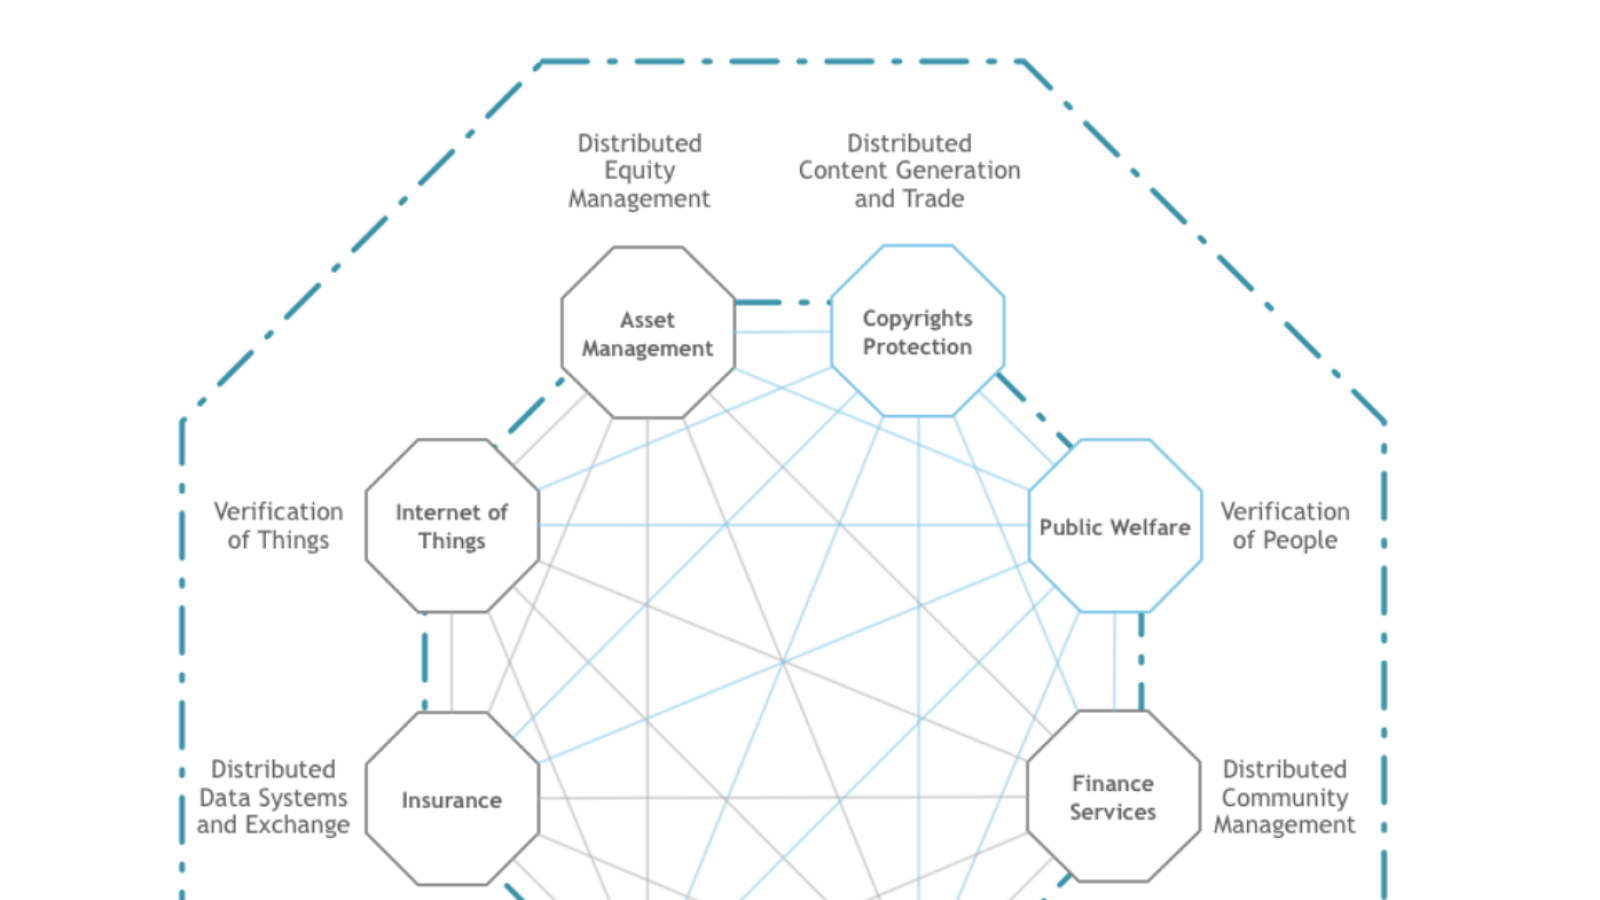 Components of Ontology network